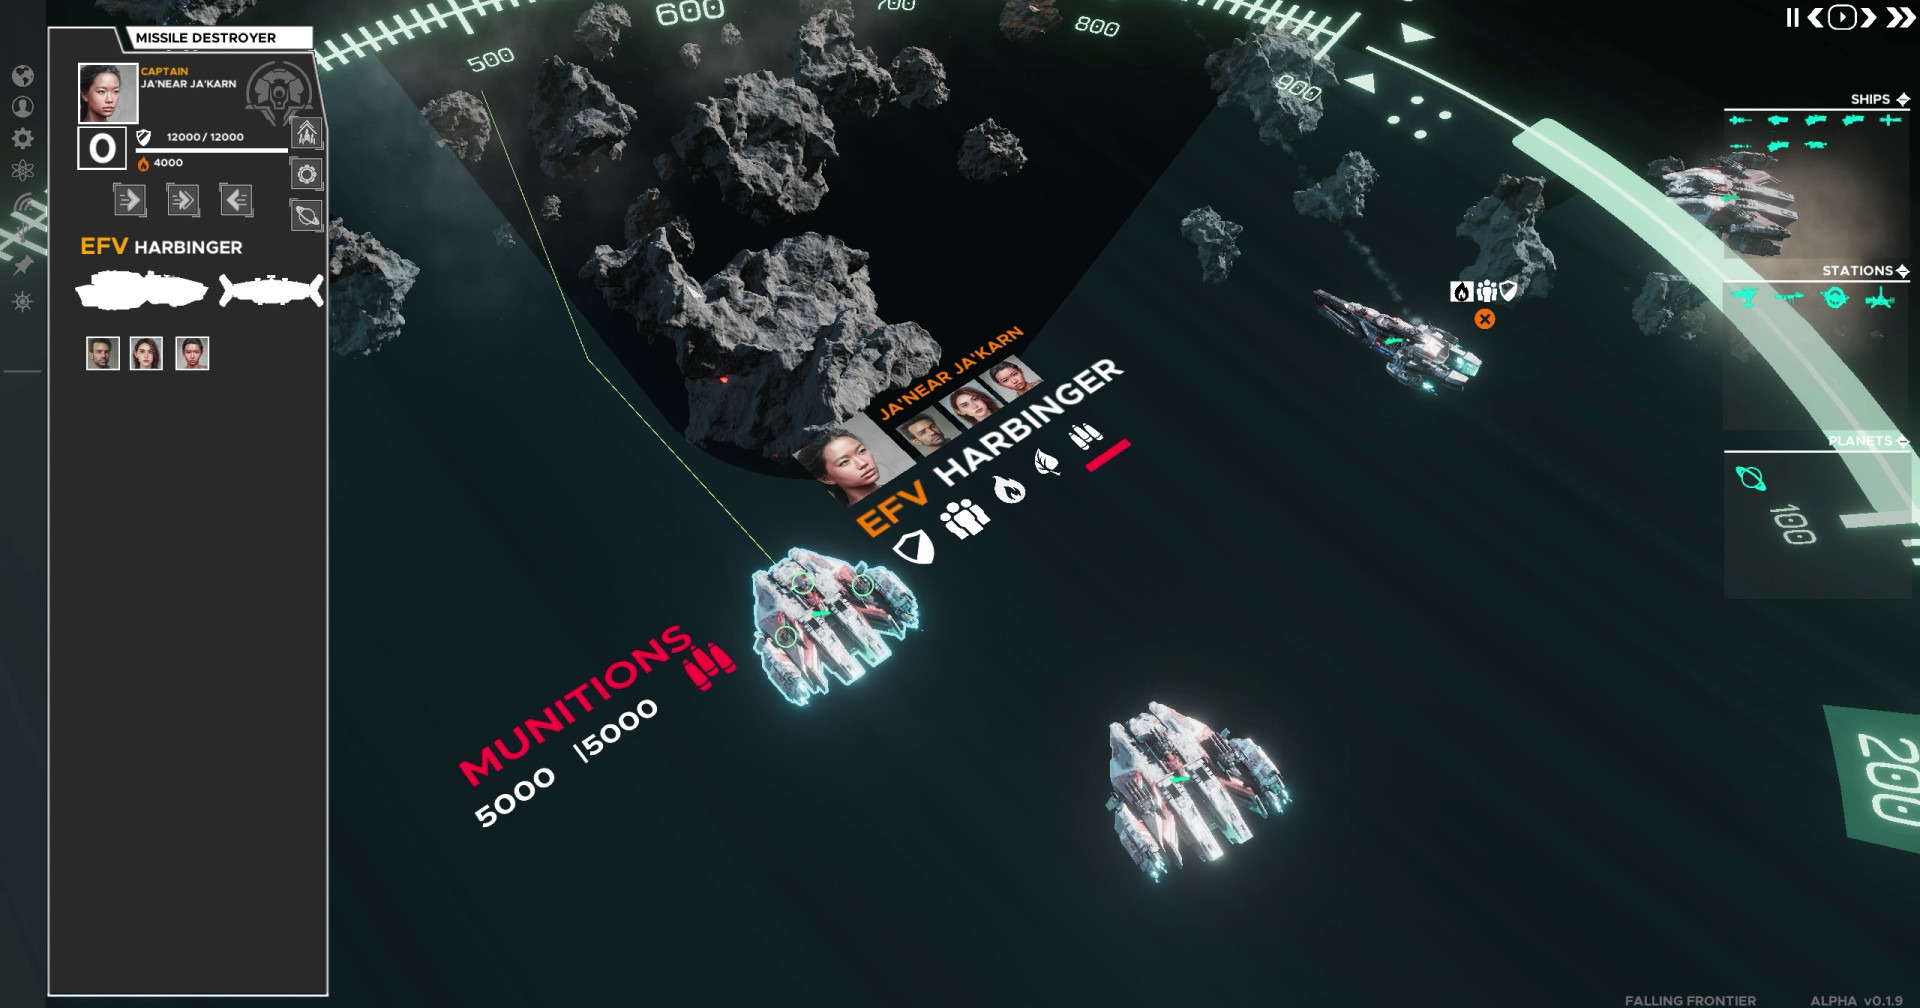 We see three spaceships in space from above, one of which is selected. Falling Frontier offers great RTS gameplay.